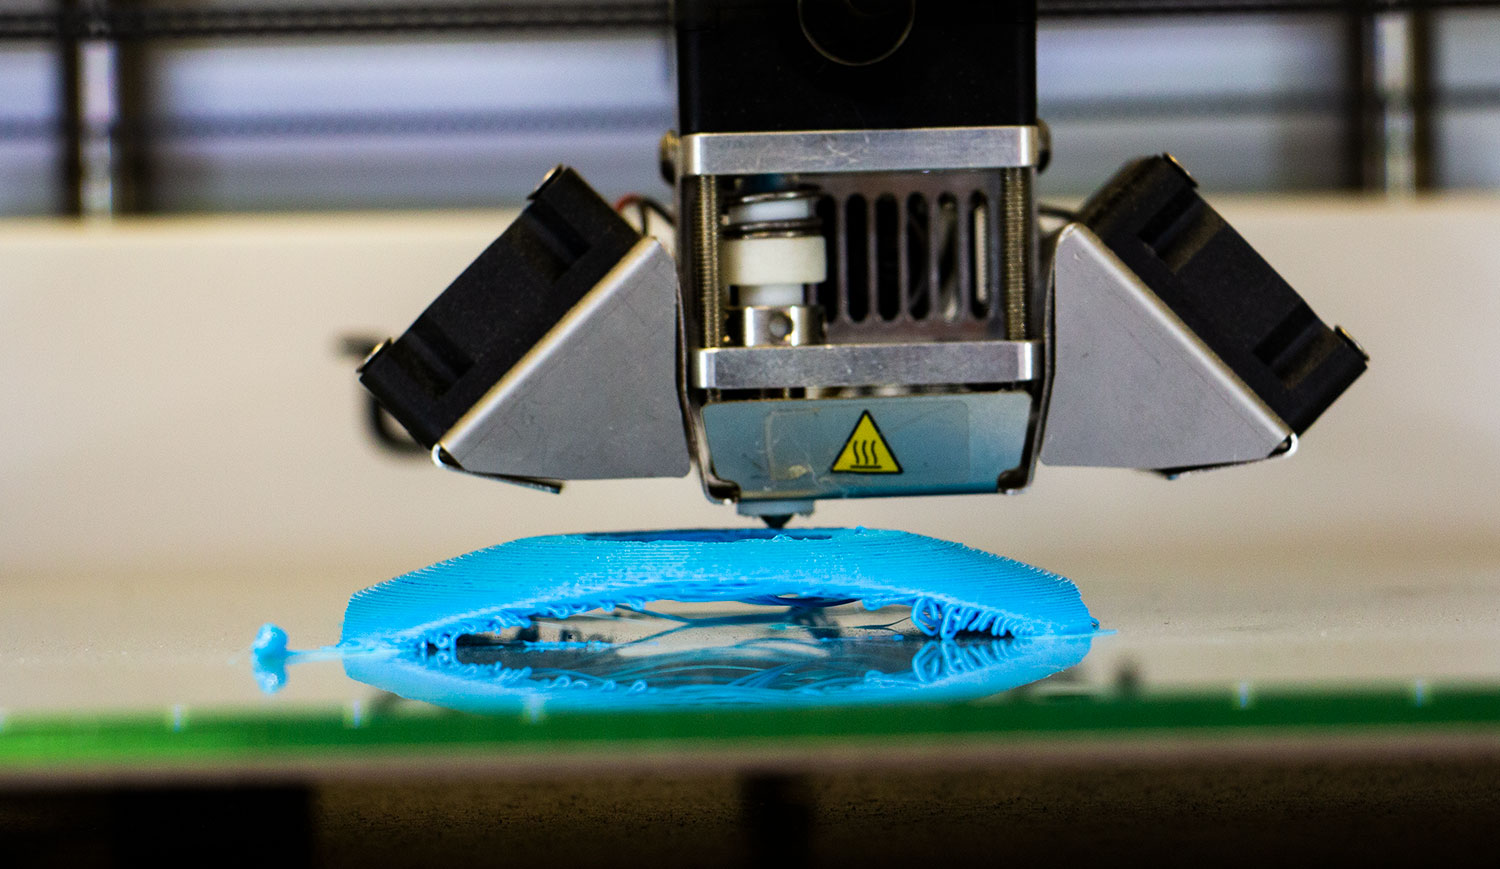 3D printing a lens comparison mold for sunglasses.